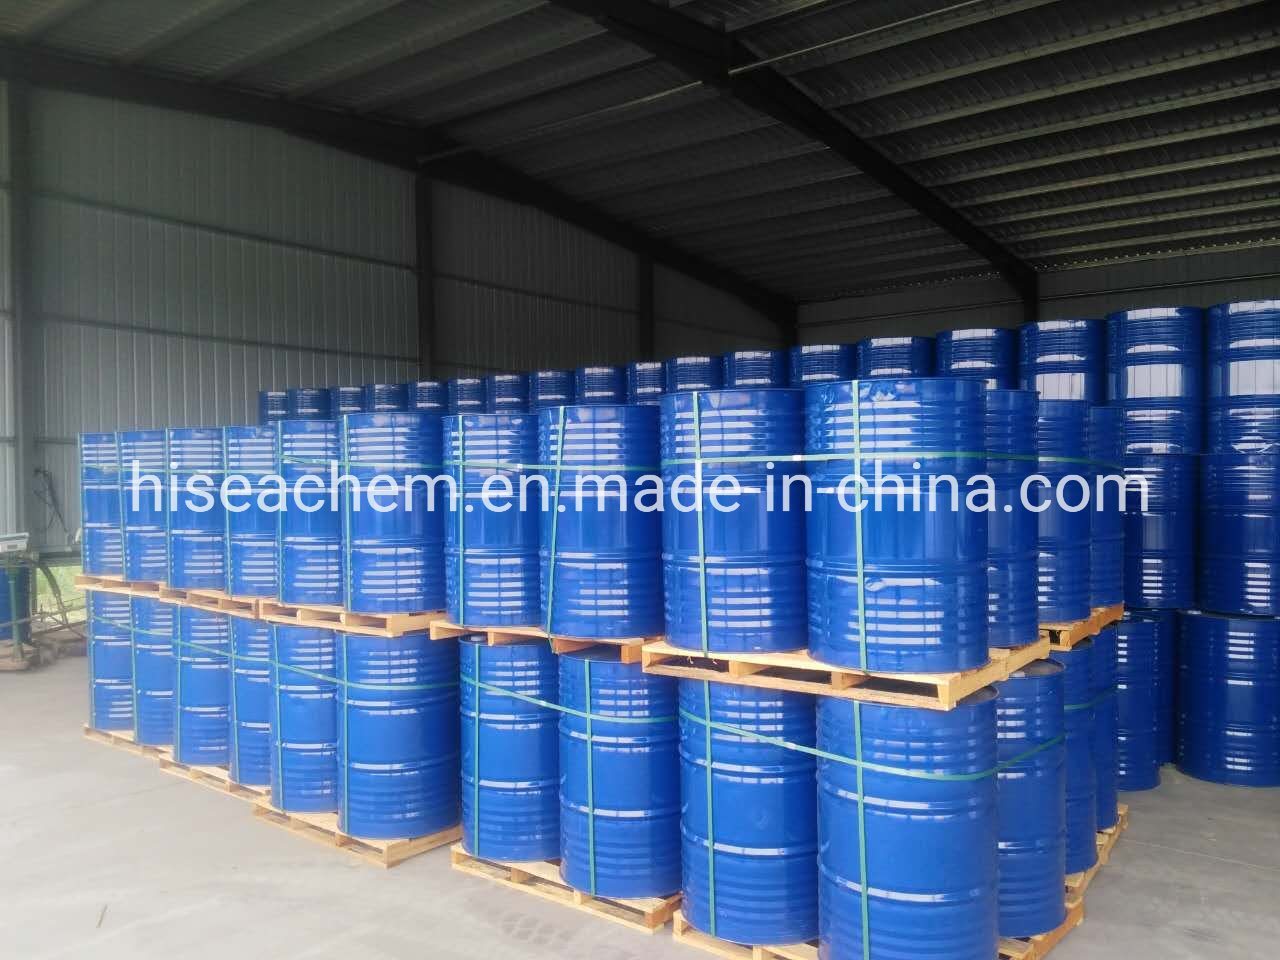 China Best Quality Industrial Grade CAS 79-09-4 Propanoic Acid Mainly